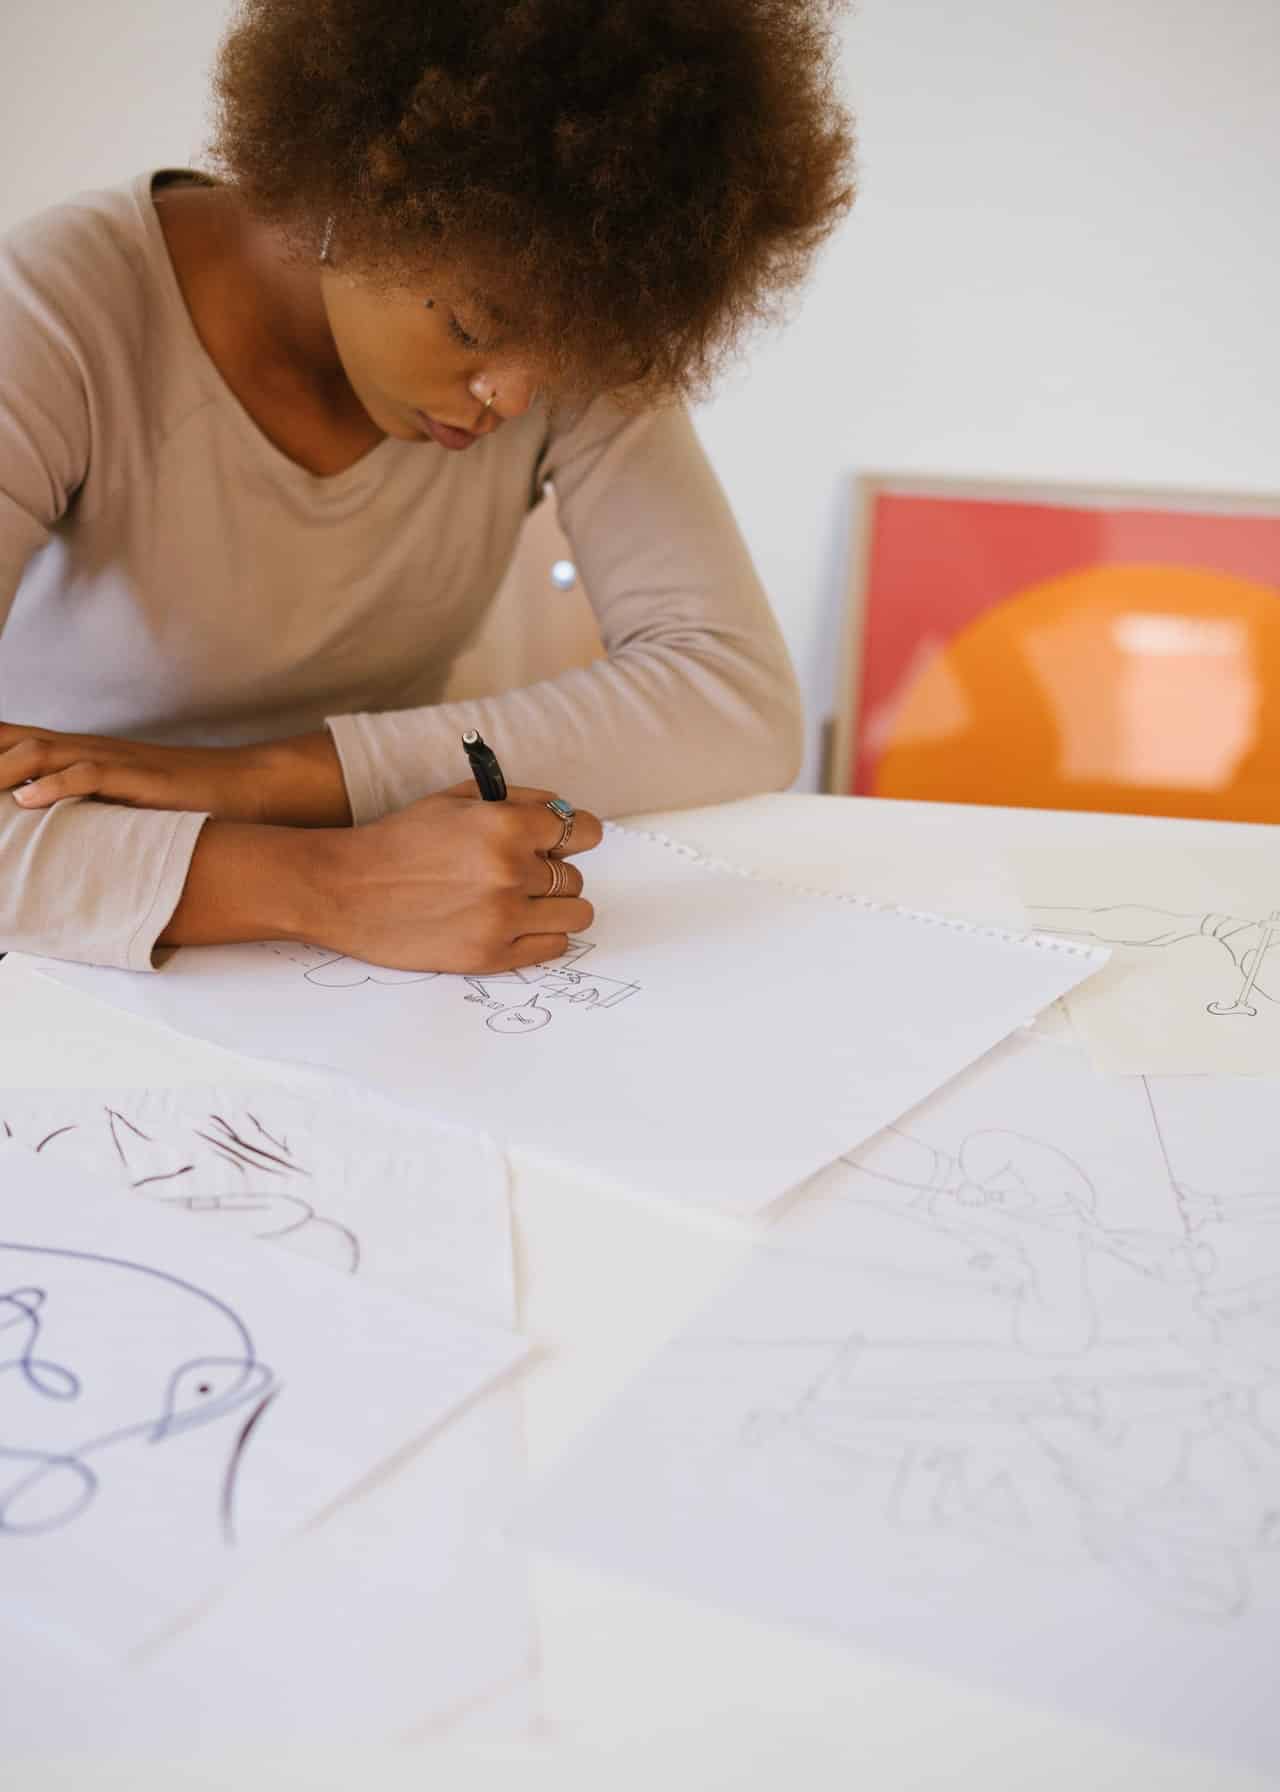 30 Art Careers to Channel Your Creative Side | LoveToKnow